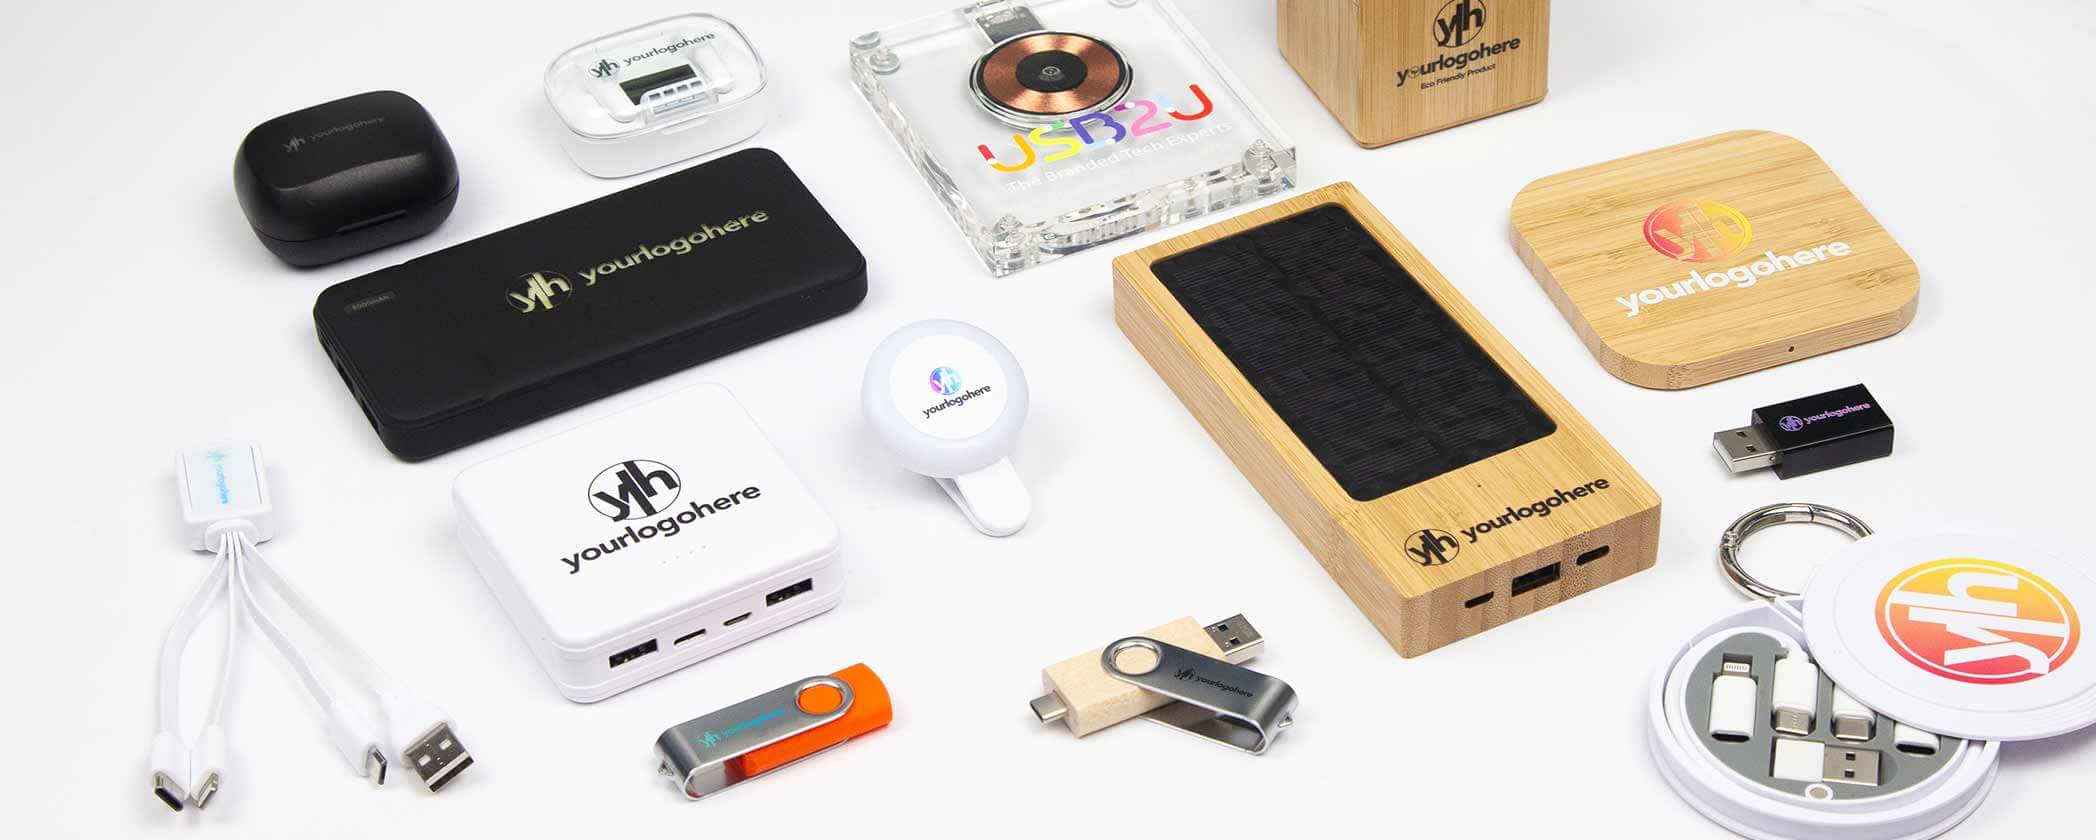 Branded USB Sticks, Power Banks and Promotional Tech